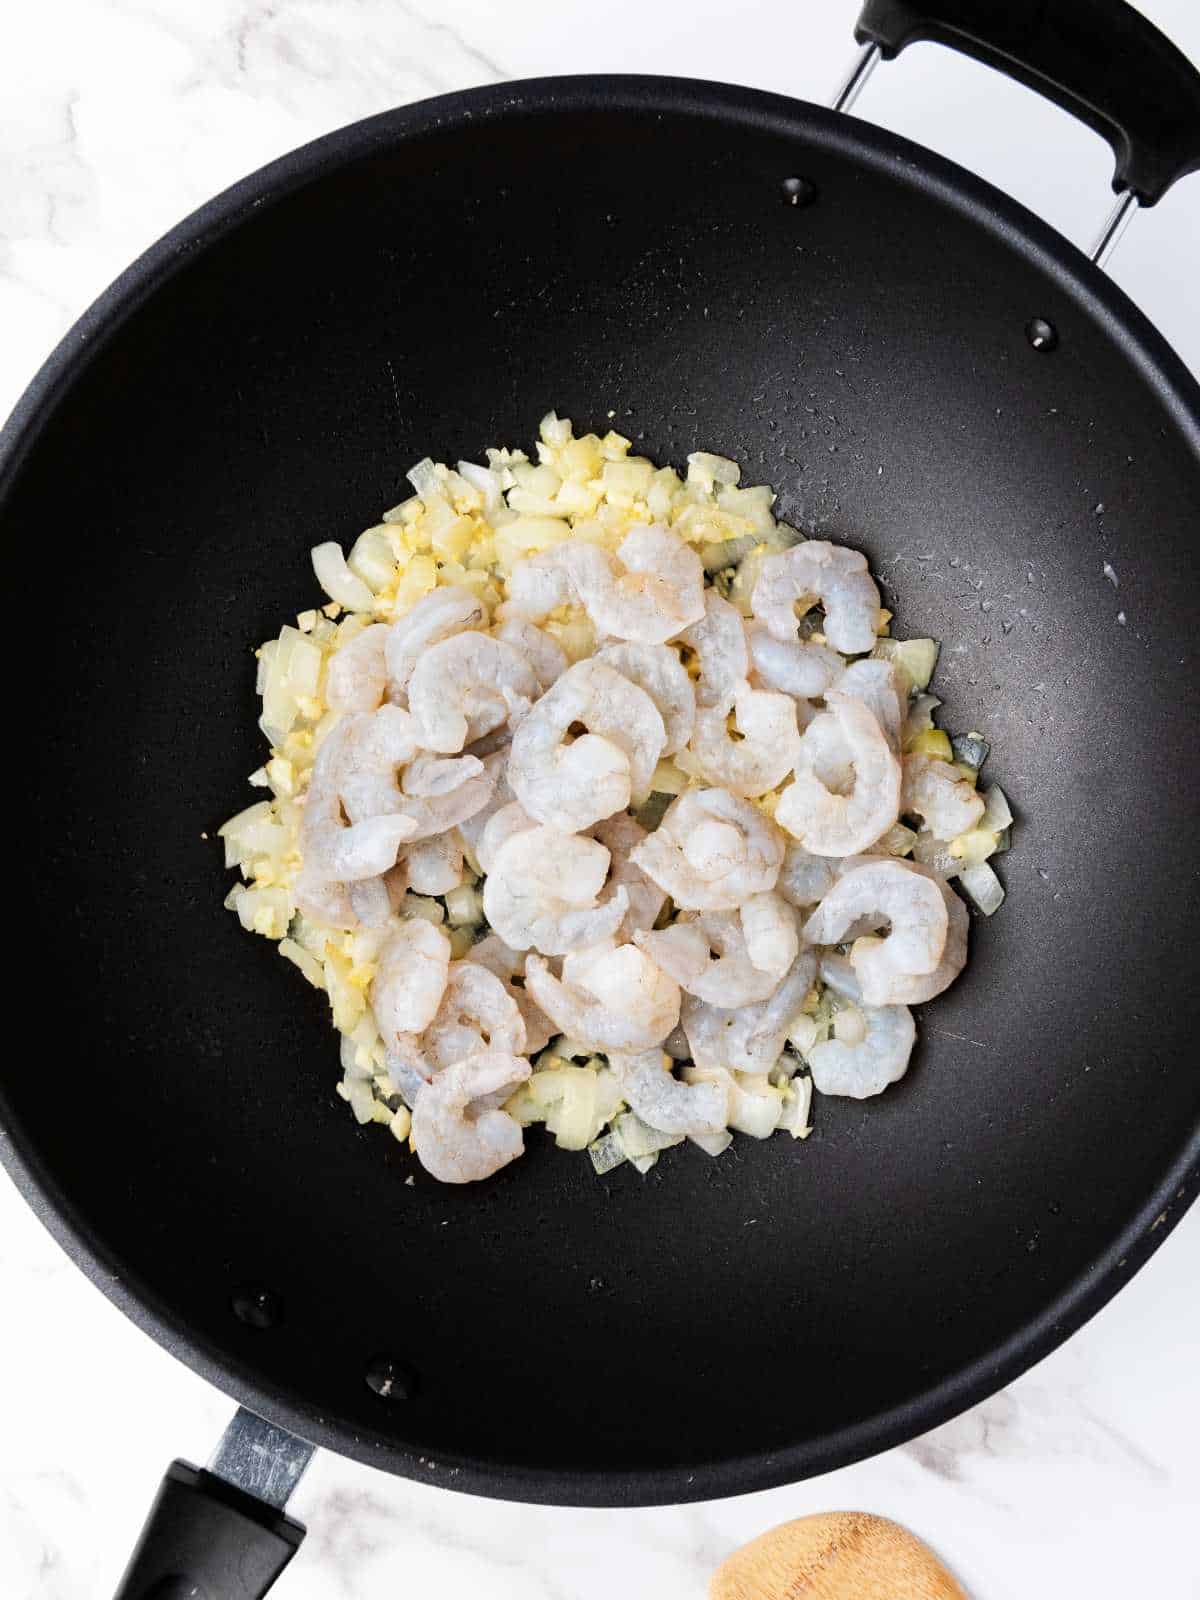 sauteed onions and garlic, with raw shrimp added to skillet.